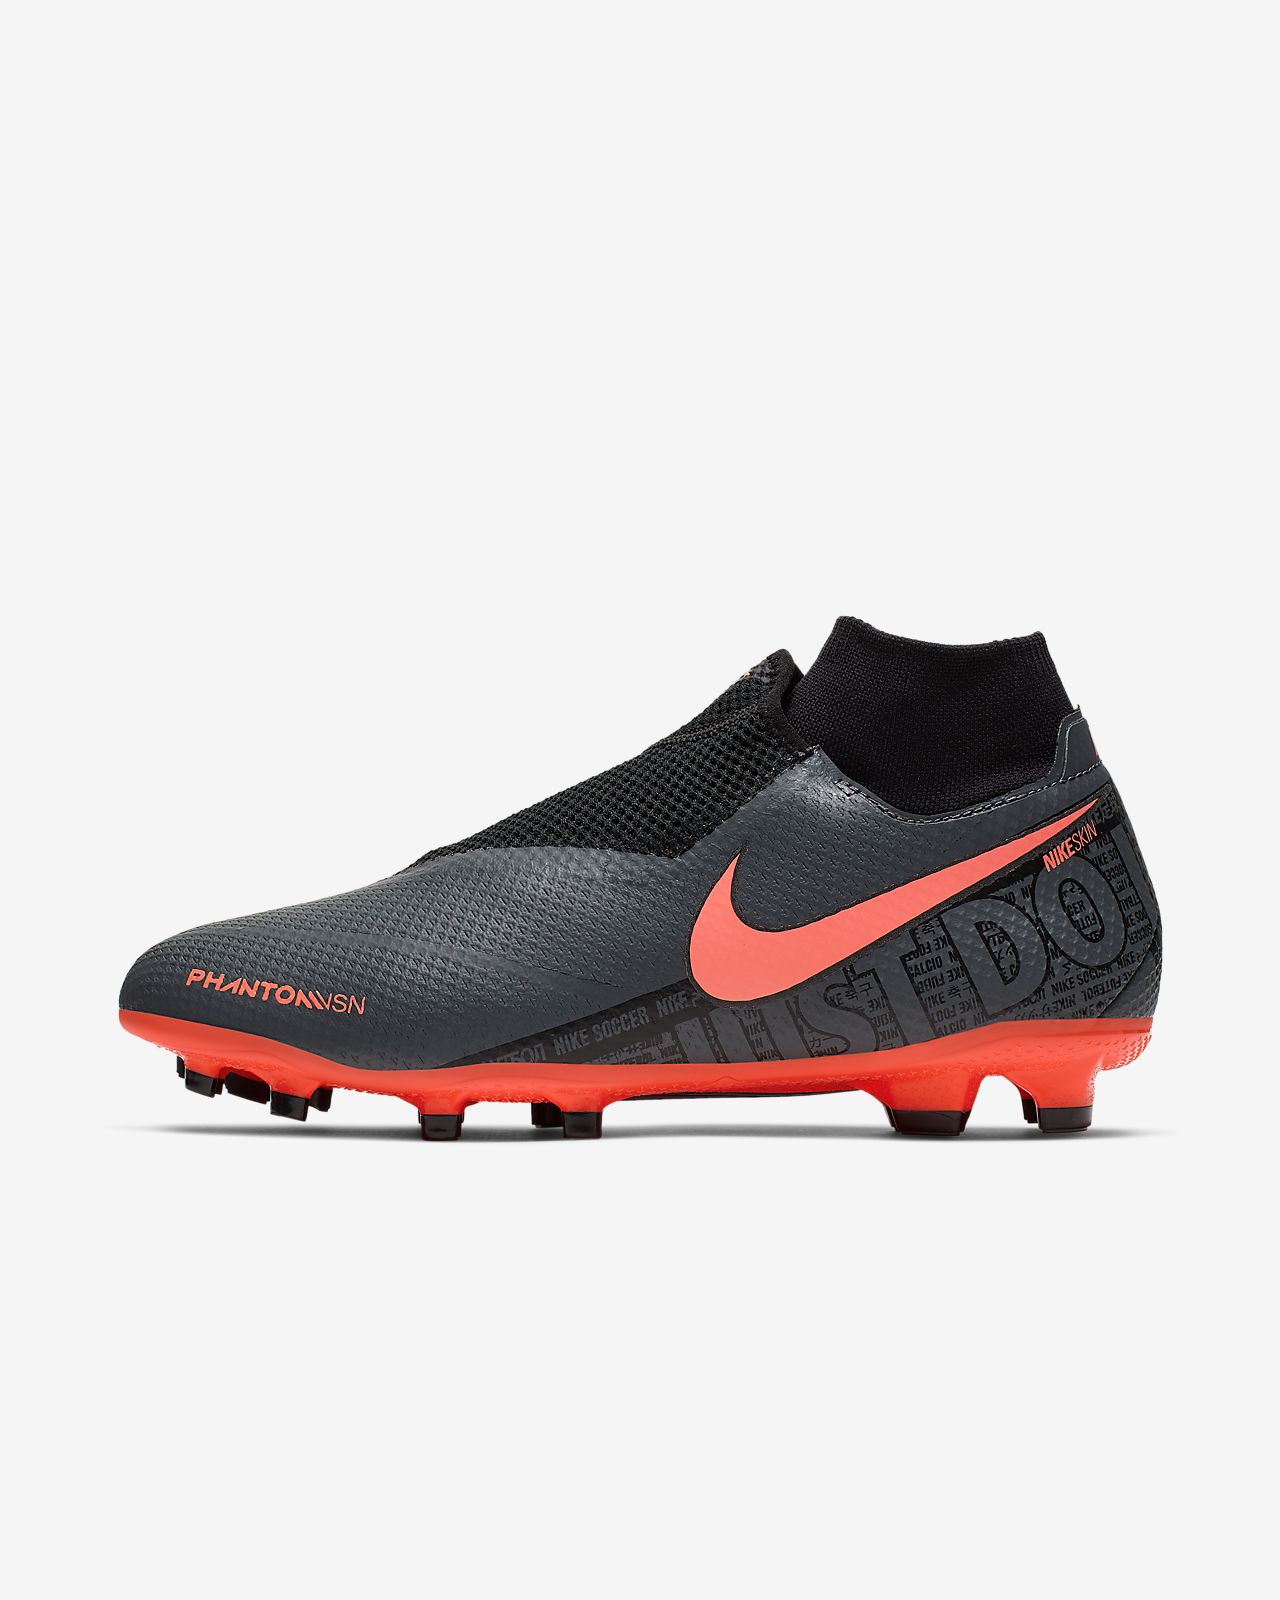 Nike Phantom Vision Pro Dynamic Fit FG Firm Ground Soccer Cleat